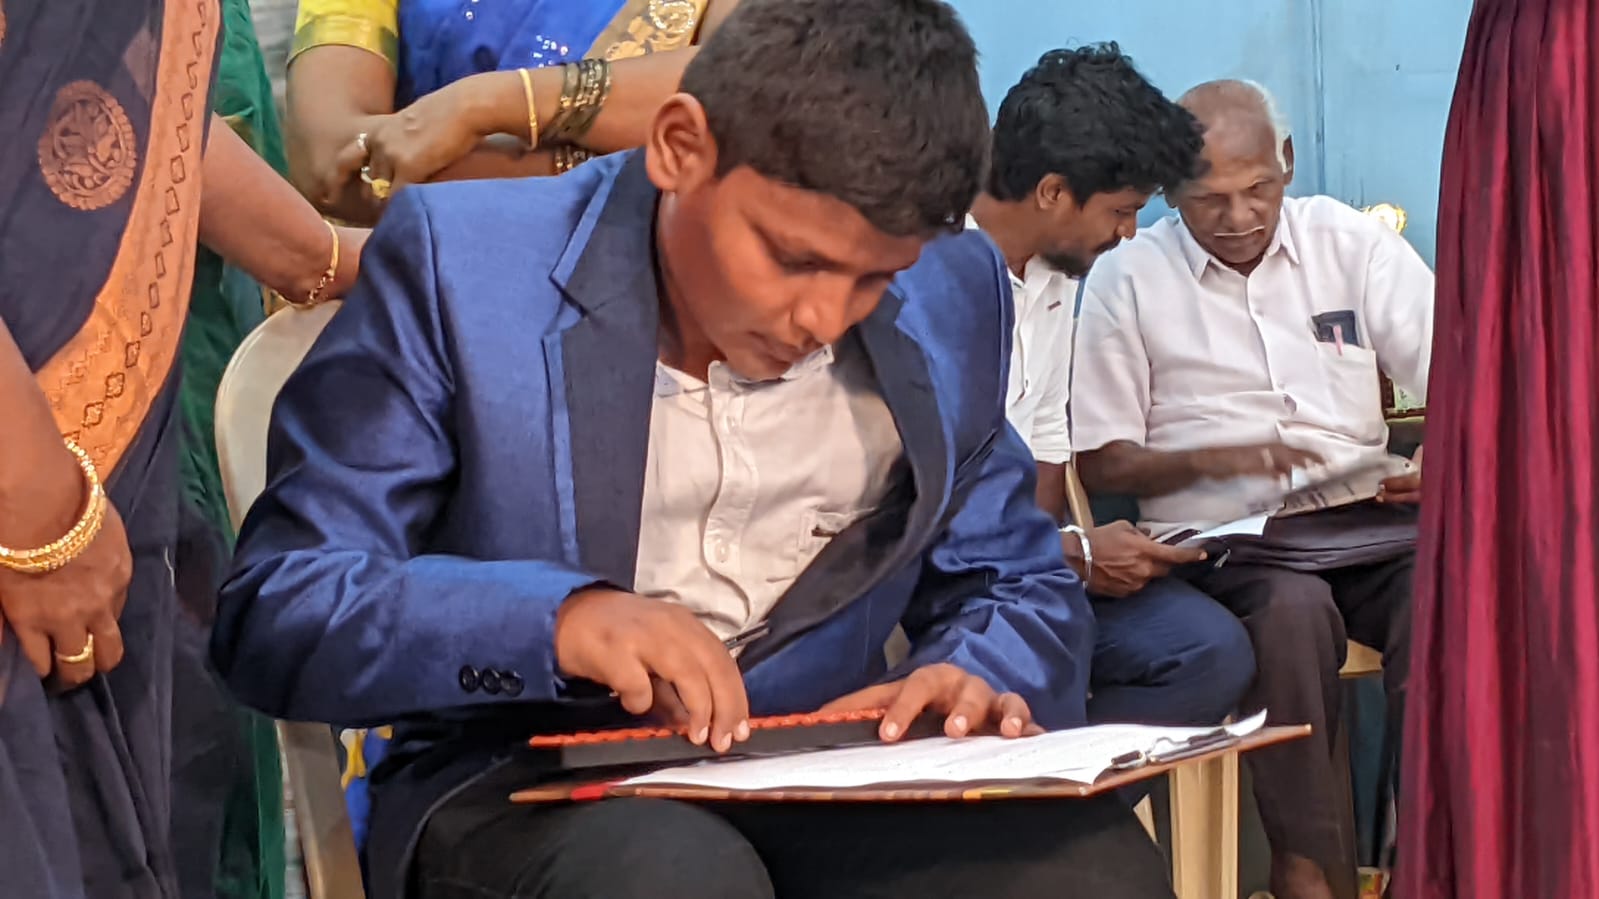 World record by solving 300 number of Addition and Subtraction  Mathematical problems using multiple ABACUS Techniques  in least time.